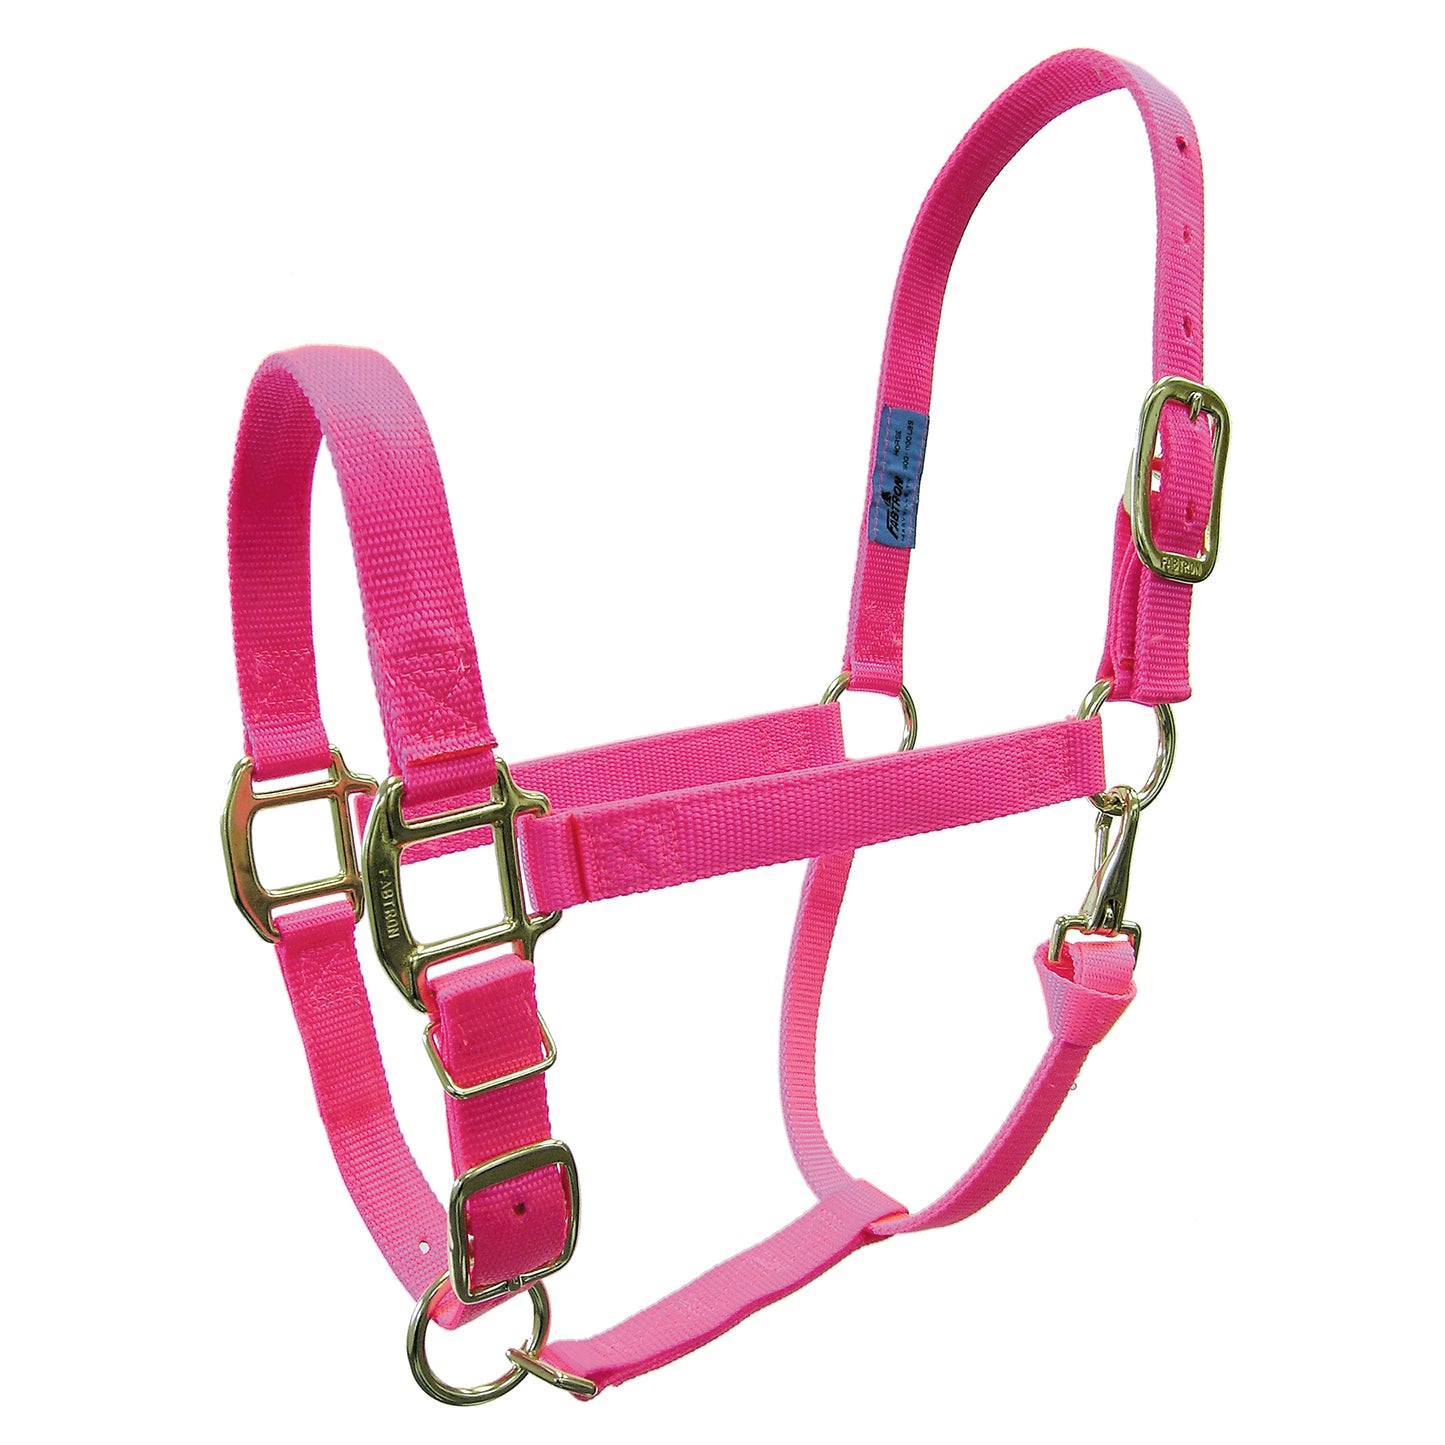 1" Hot Color Adjustable Nylon Halters **LIMITED QUANTITY AVAILABLE**